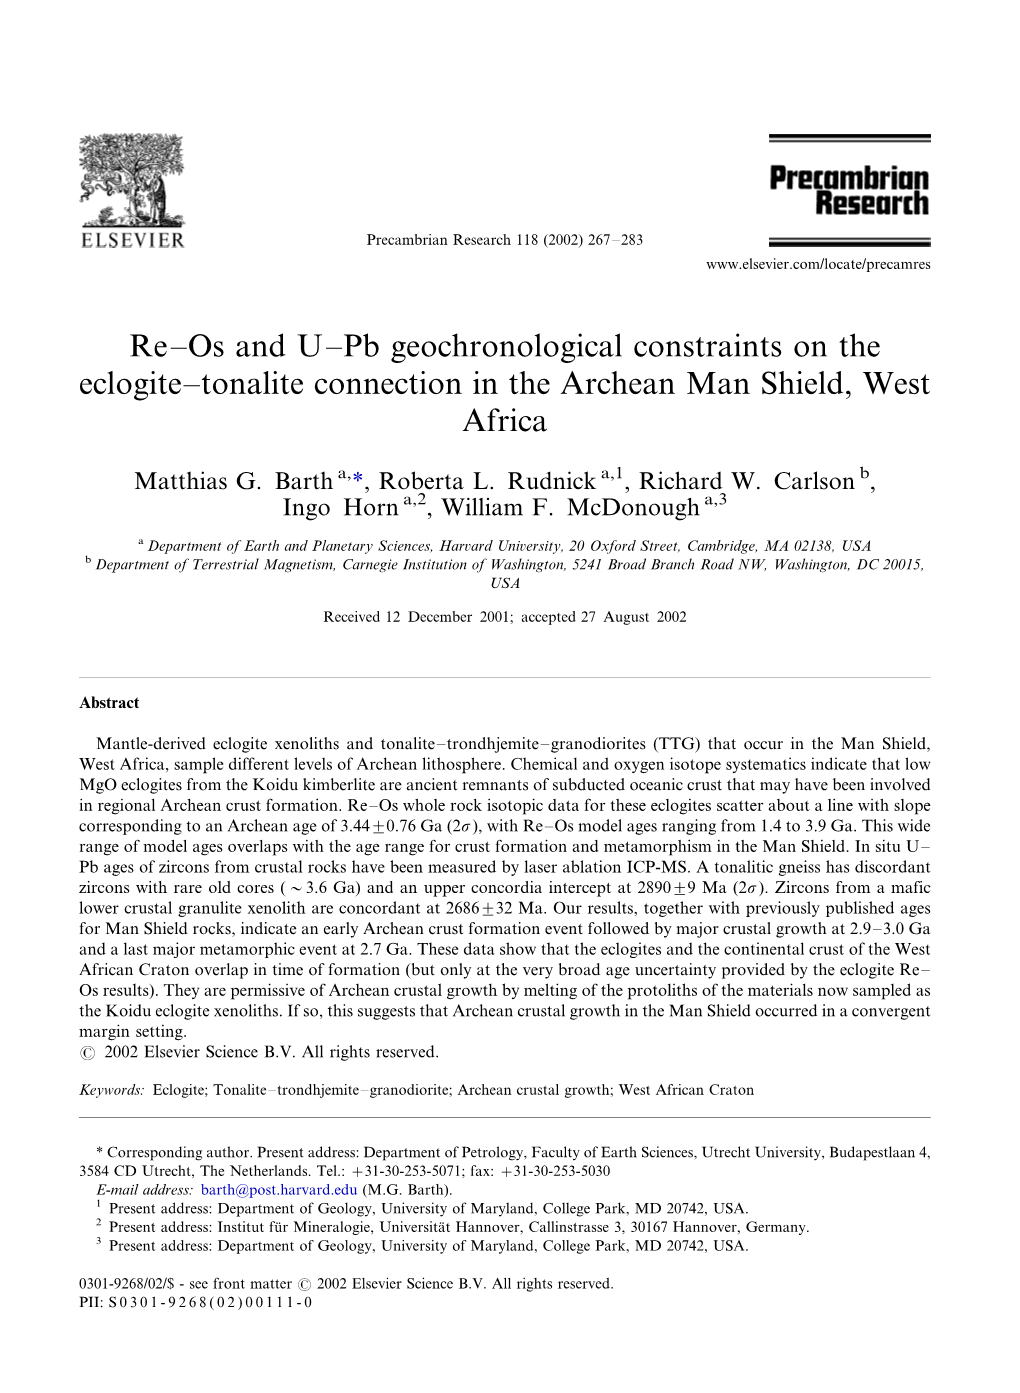 Reã/Os and UÃ/Pb Geochronological Constraints on the Eclogiteá/Tonalite Connection in the Archean Man Shield, West Africa